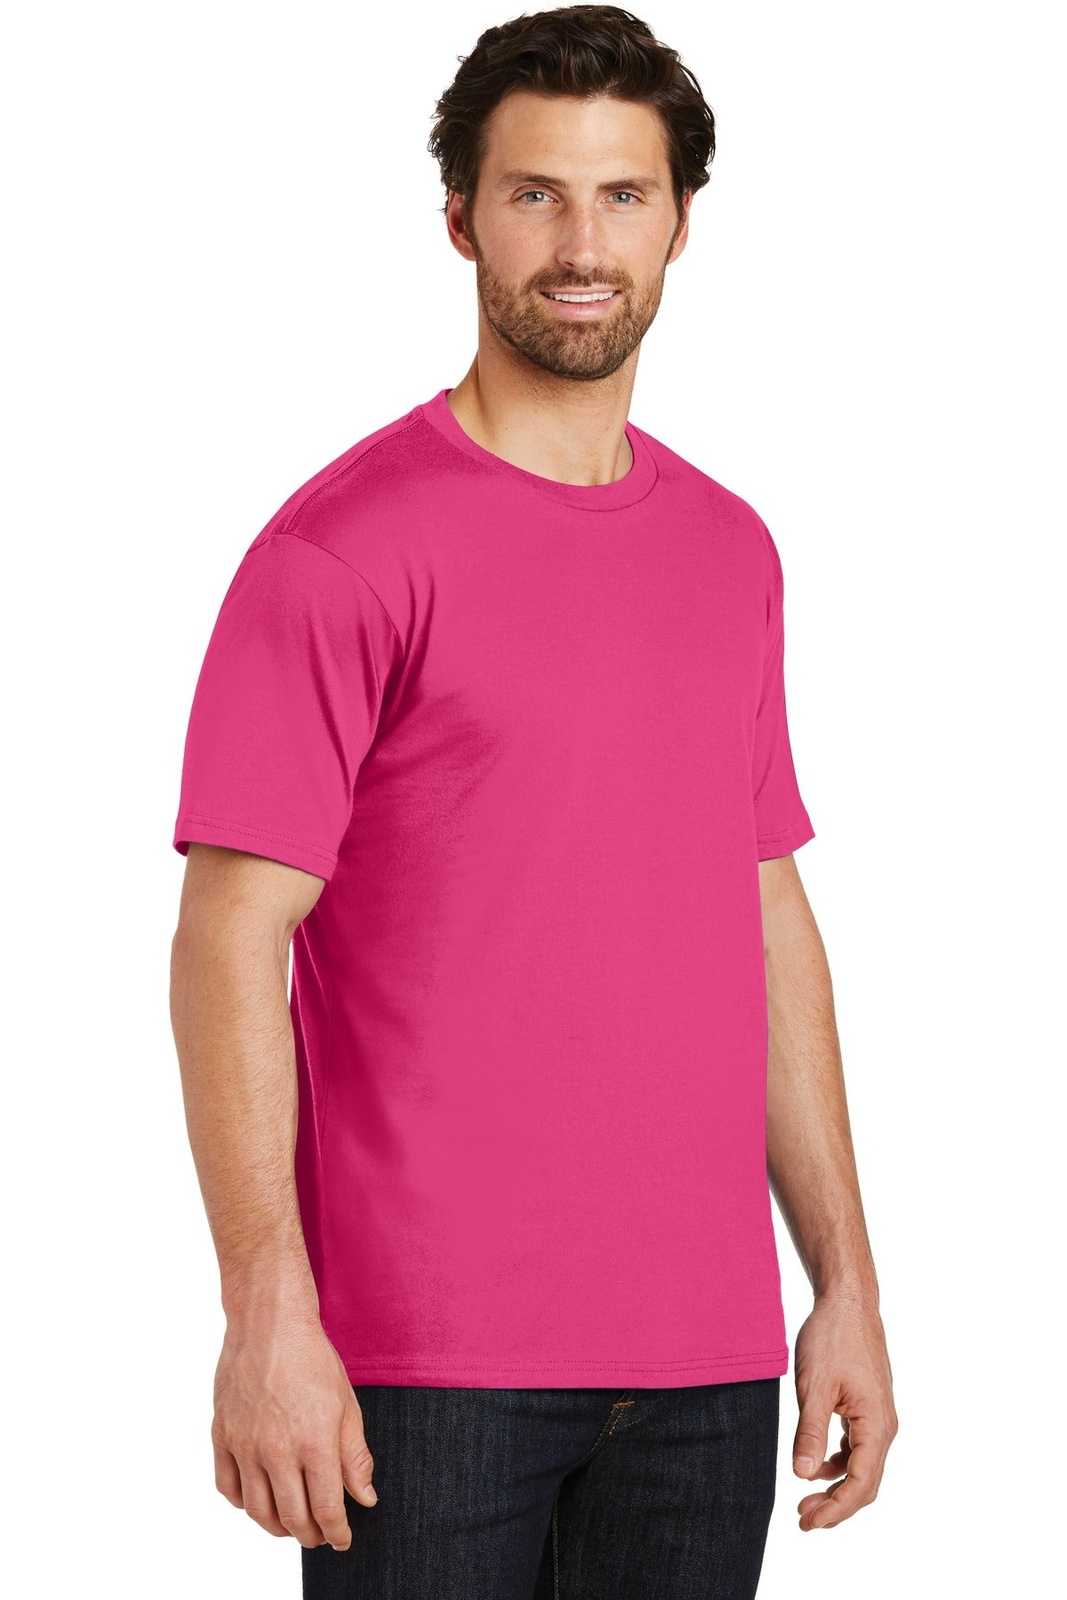 District DT104 Perfect Weight Tee - Dark Fuchsia - HIT a Double - 4